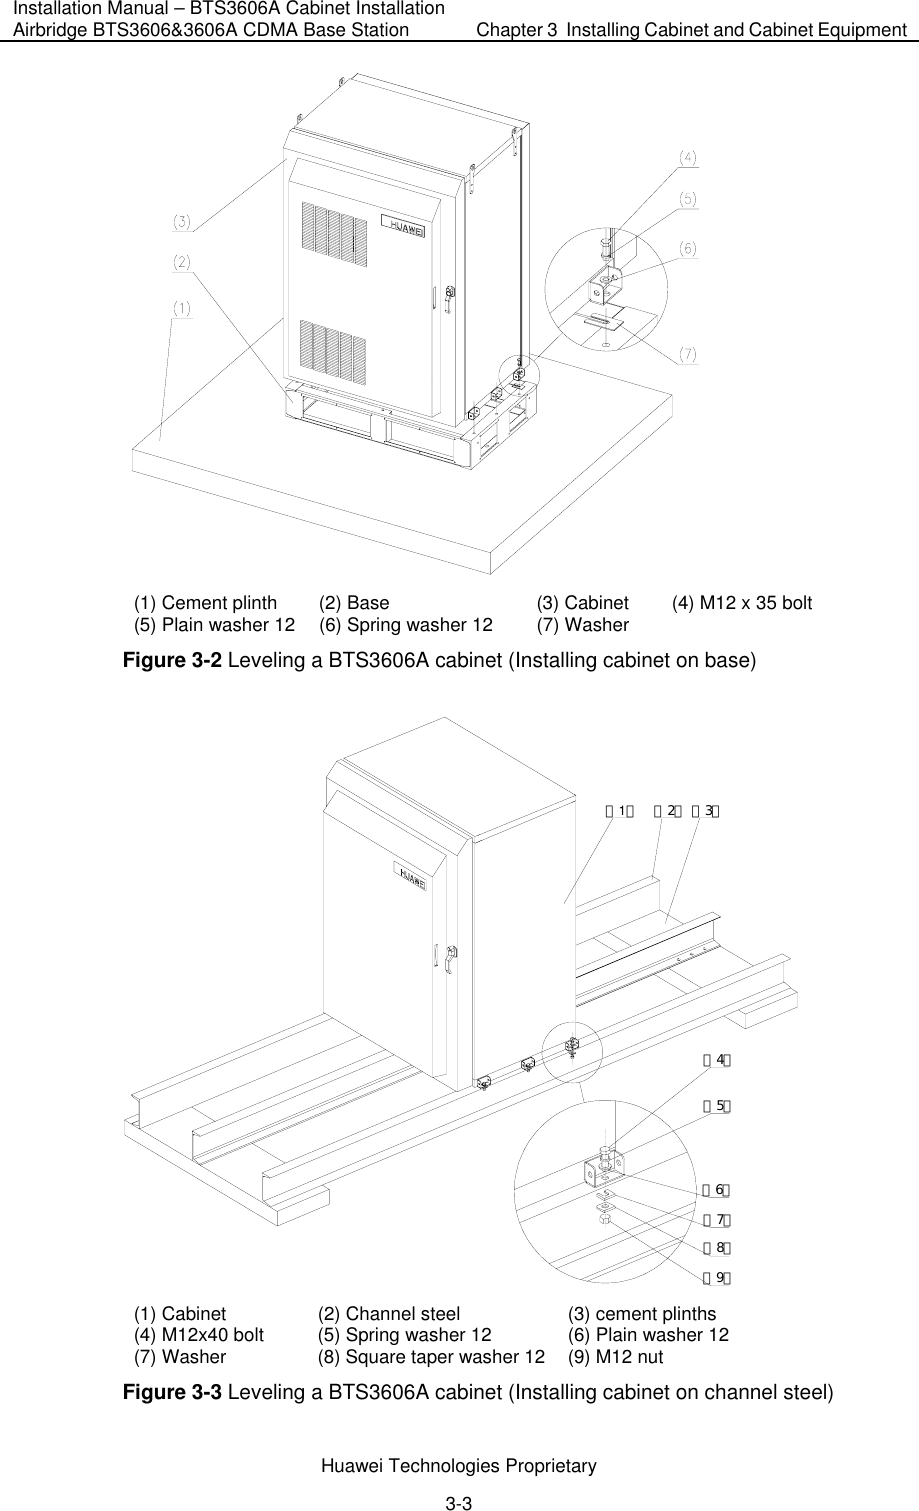 Installation Manual – BTS3606A Cabinet Installation Airbridge BTS3606&amp;3606A CDMA Base Station  Chapter 3  Installing Cabinet and Cabinet Equipment  Huawei Technologies Proprietary 3-3  (1) Cement plinth  (2) Base  (3) Cabinet  (4) M12 x 35 bolt (5) Plain washer 12  (6) Spring washer 12  (7) Washer   Figure 3-2 Leveling a BTS3606A cabinet (Installing cabinet on base) （1）（2）（3）（4）（5）（6）（7）（8）（9） (1) Cabinet  (2) Channel steel  (3) cement plinths (4) M12x40 bolt  (5) Spring washer 12  (6) Plain washer 12 (7) Washer  (8) Square taper washer 12  (9) M12 nut Figure 3-3 Leveling a BTS3606A cabinet (Installing cabinet on channel steel) 